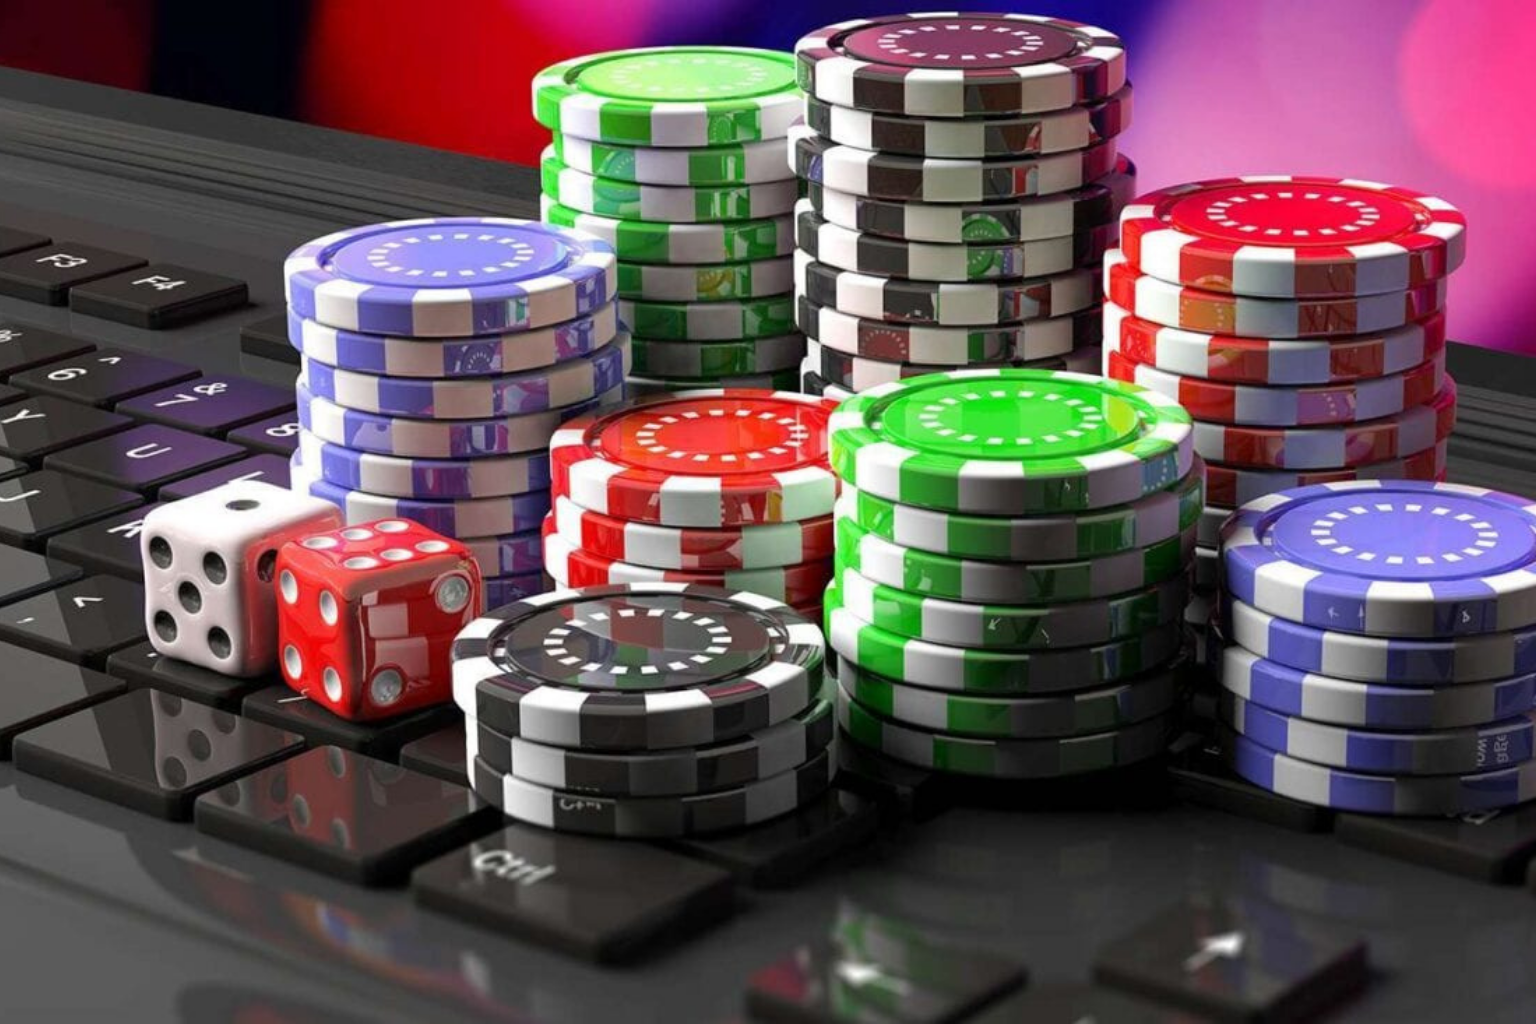 real casino games for real money online